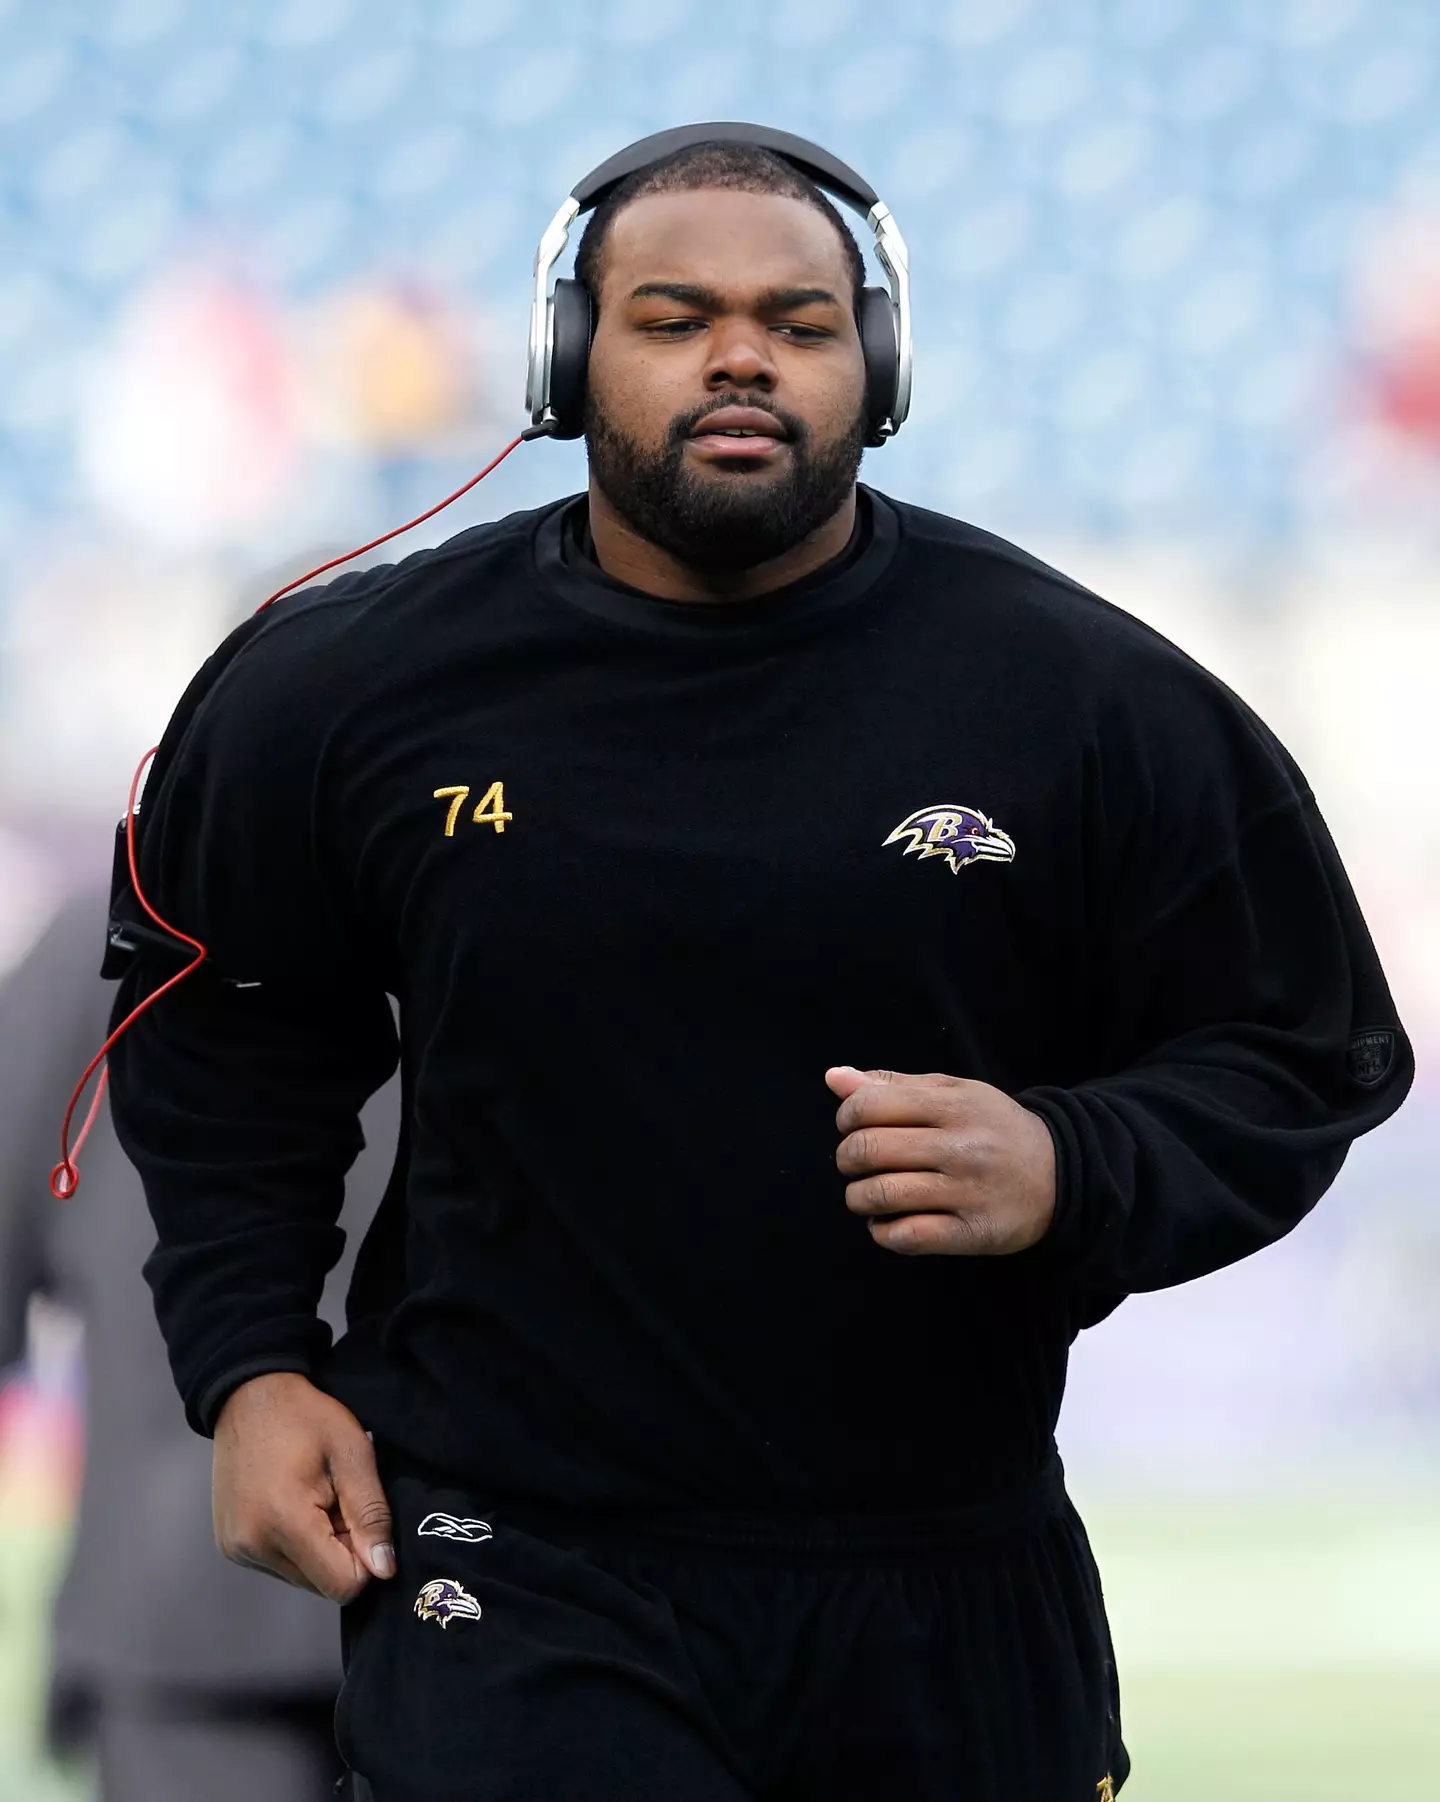 Michael Oher has petitioned a Tennessee court claiming his adoption was a lie.